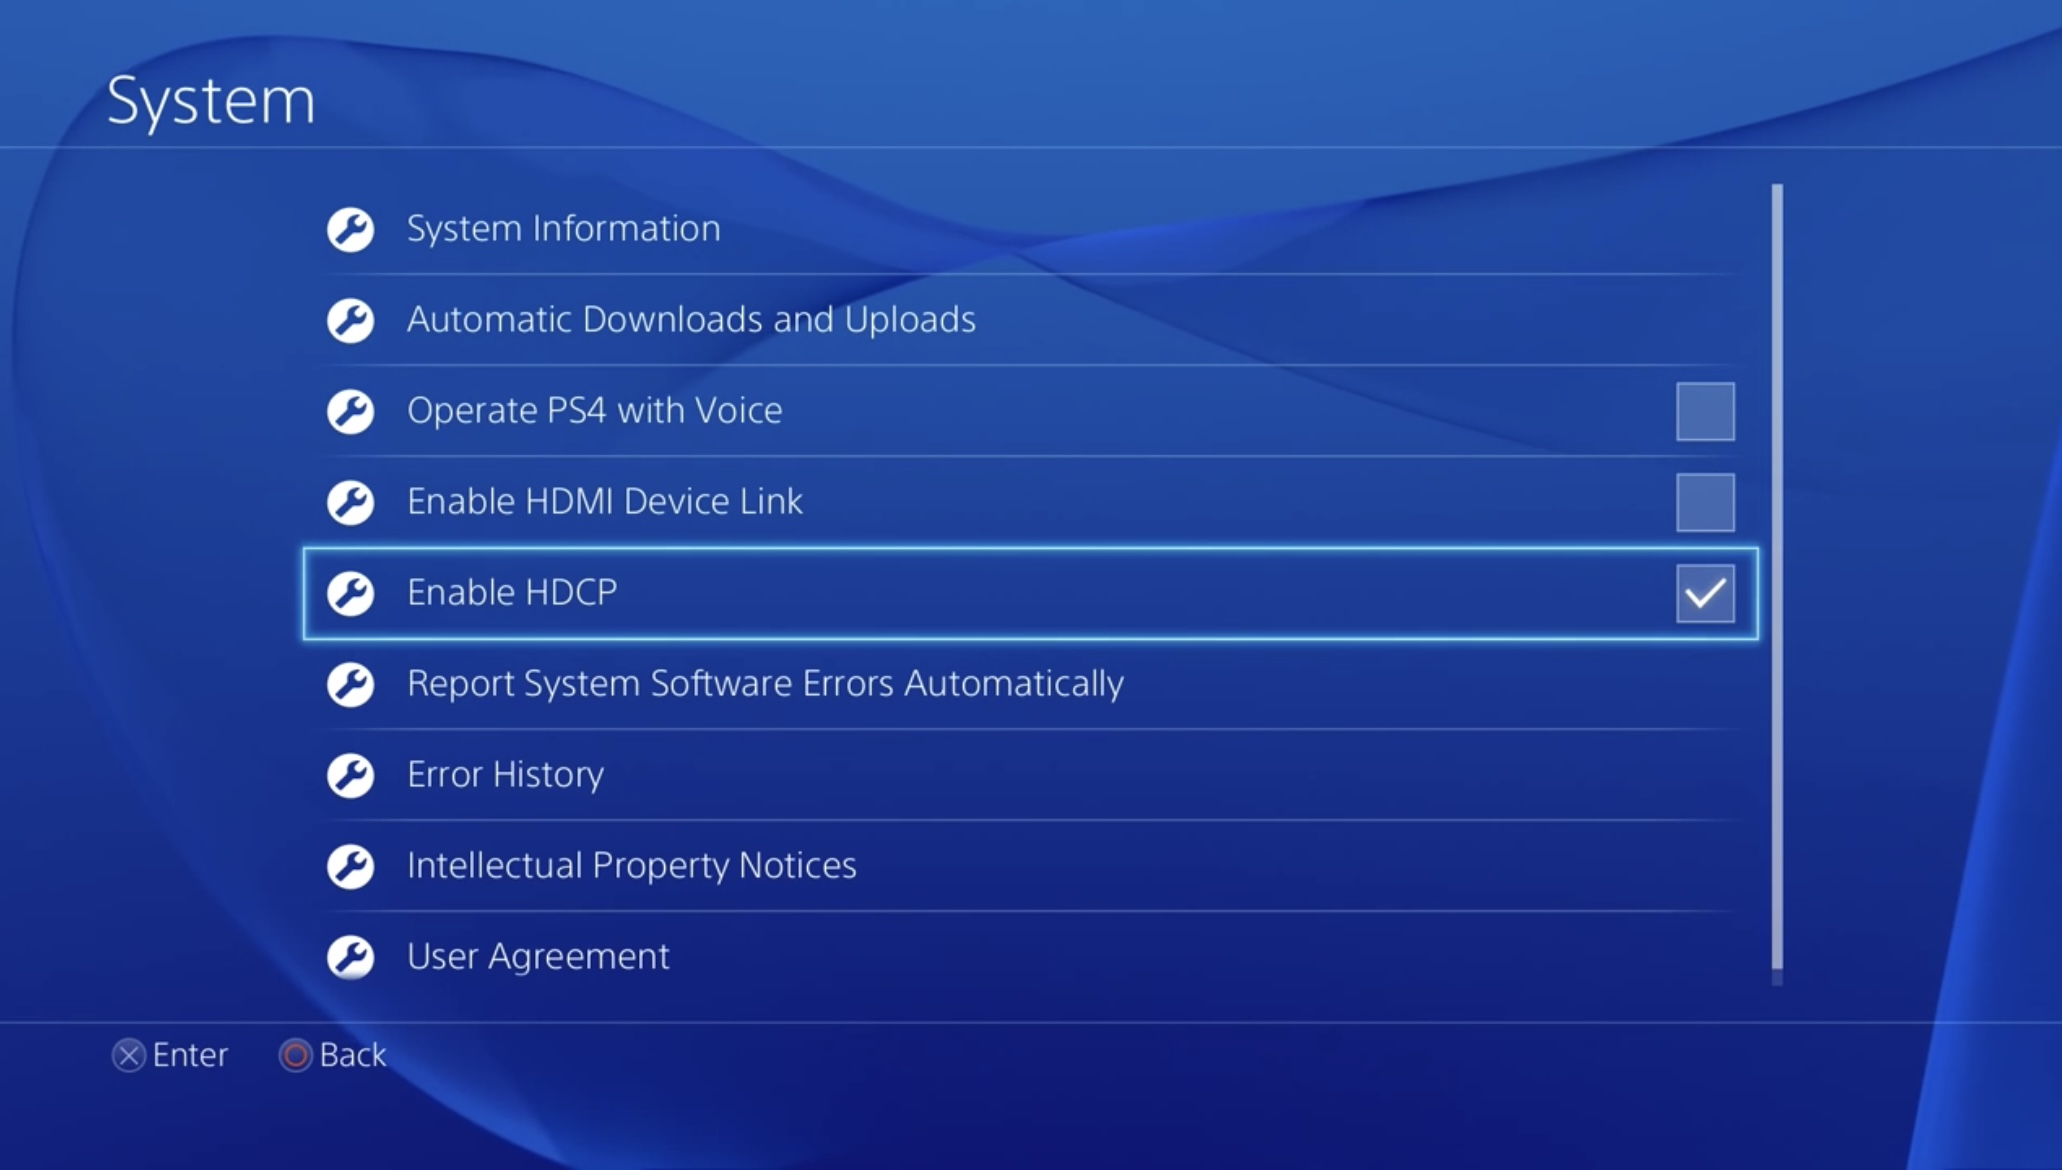 What is HDCP & How Disable HDCP on PS4?